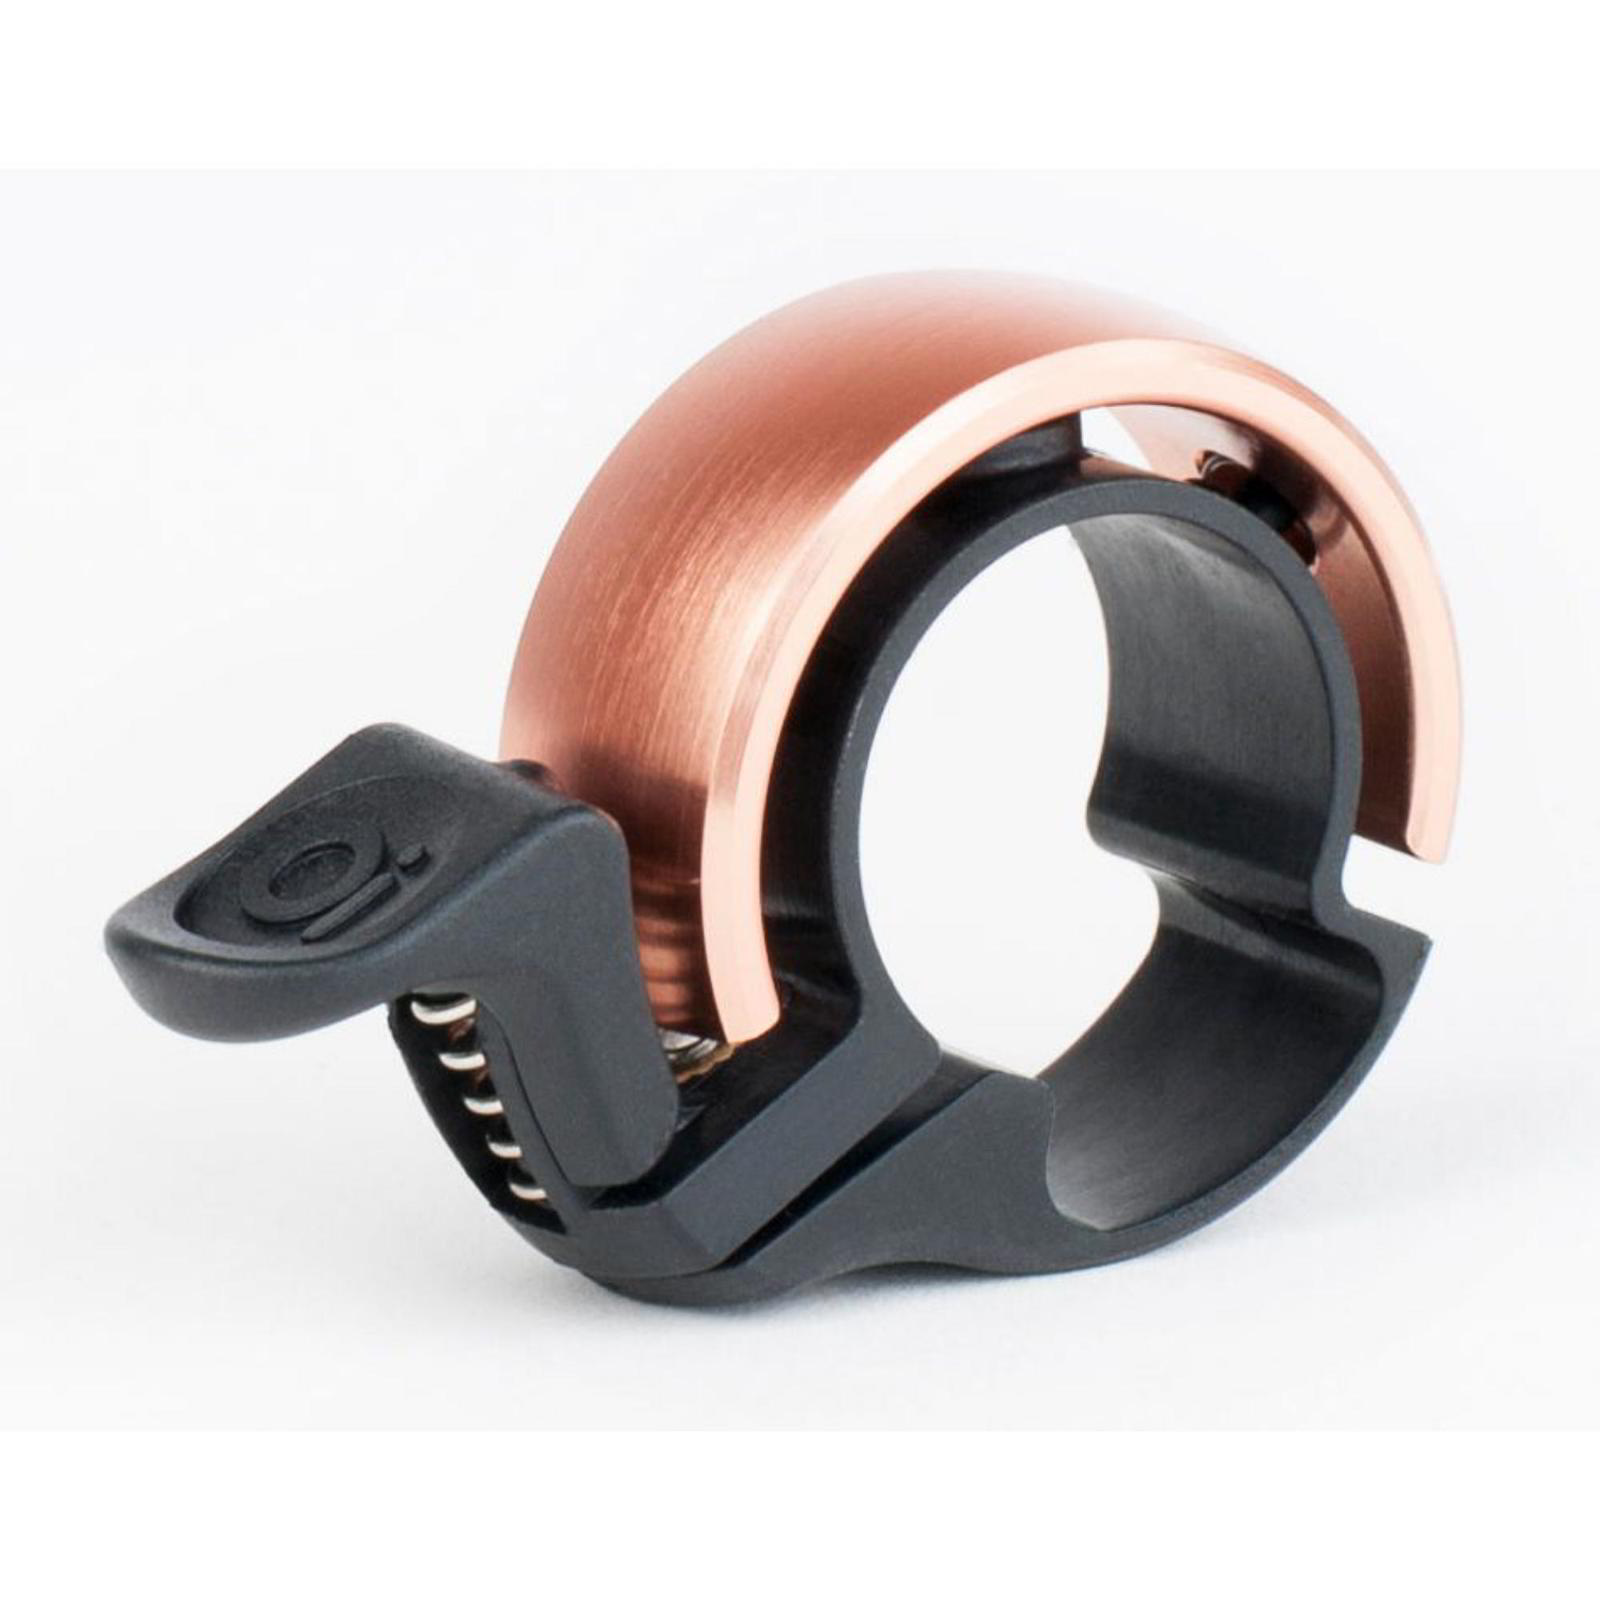 Knog Oi Classic Bicycle Bell - Copper - Picture 1 of 1